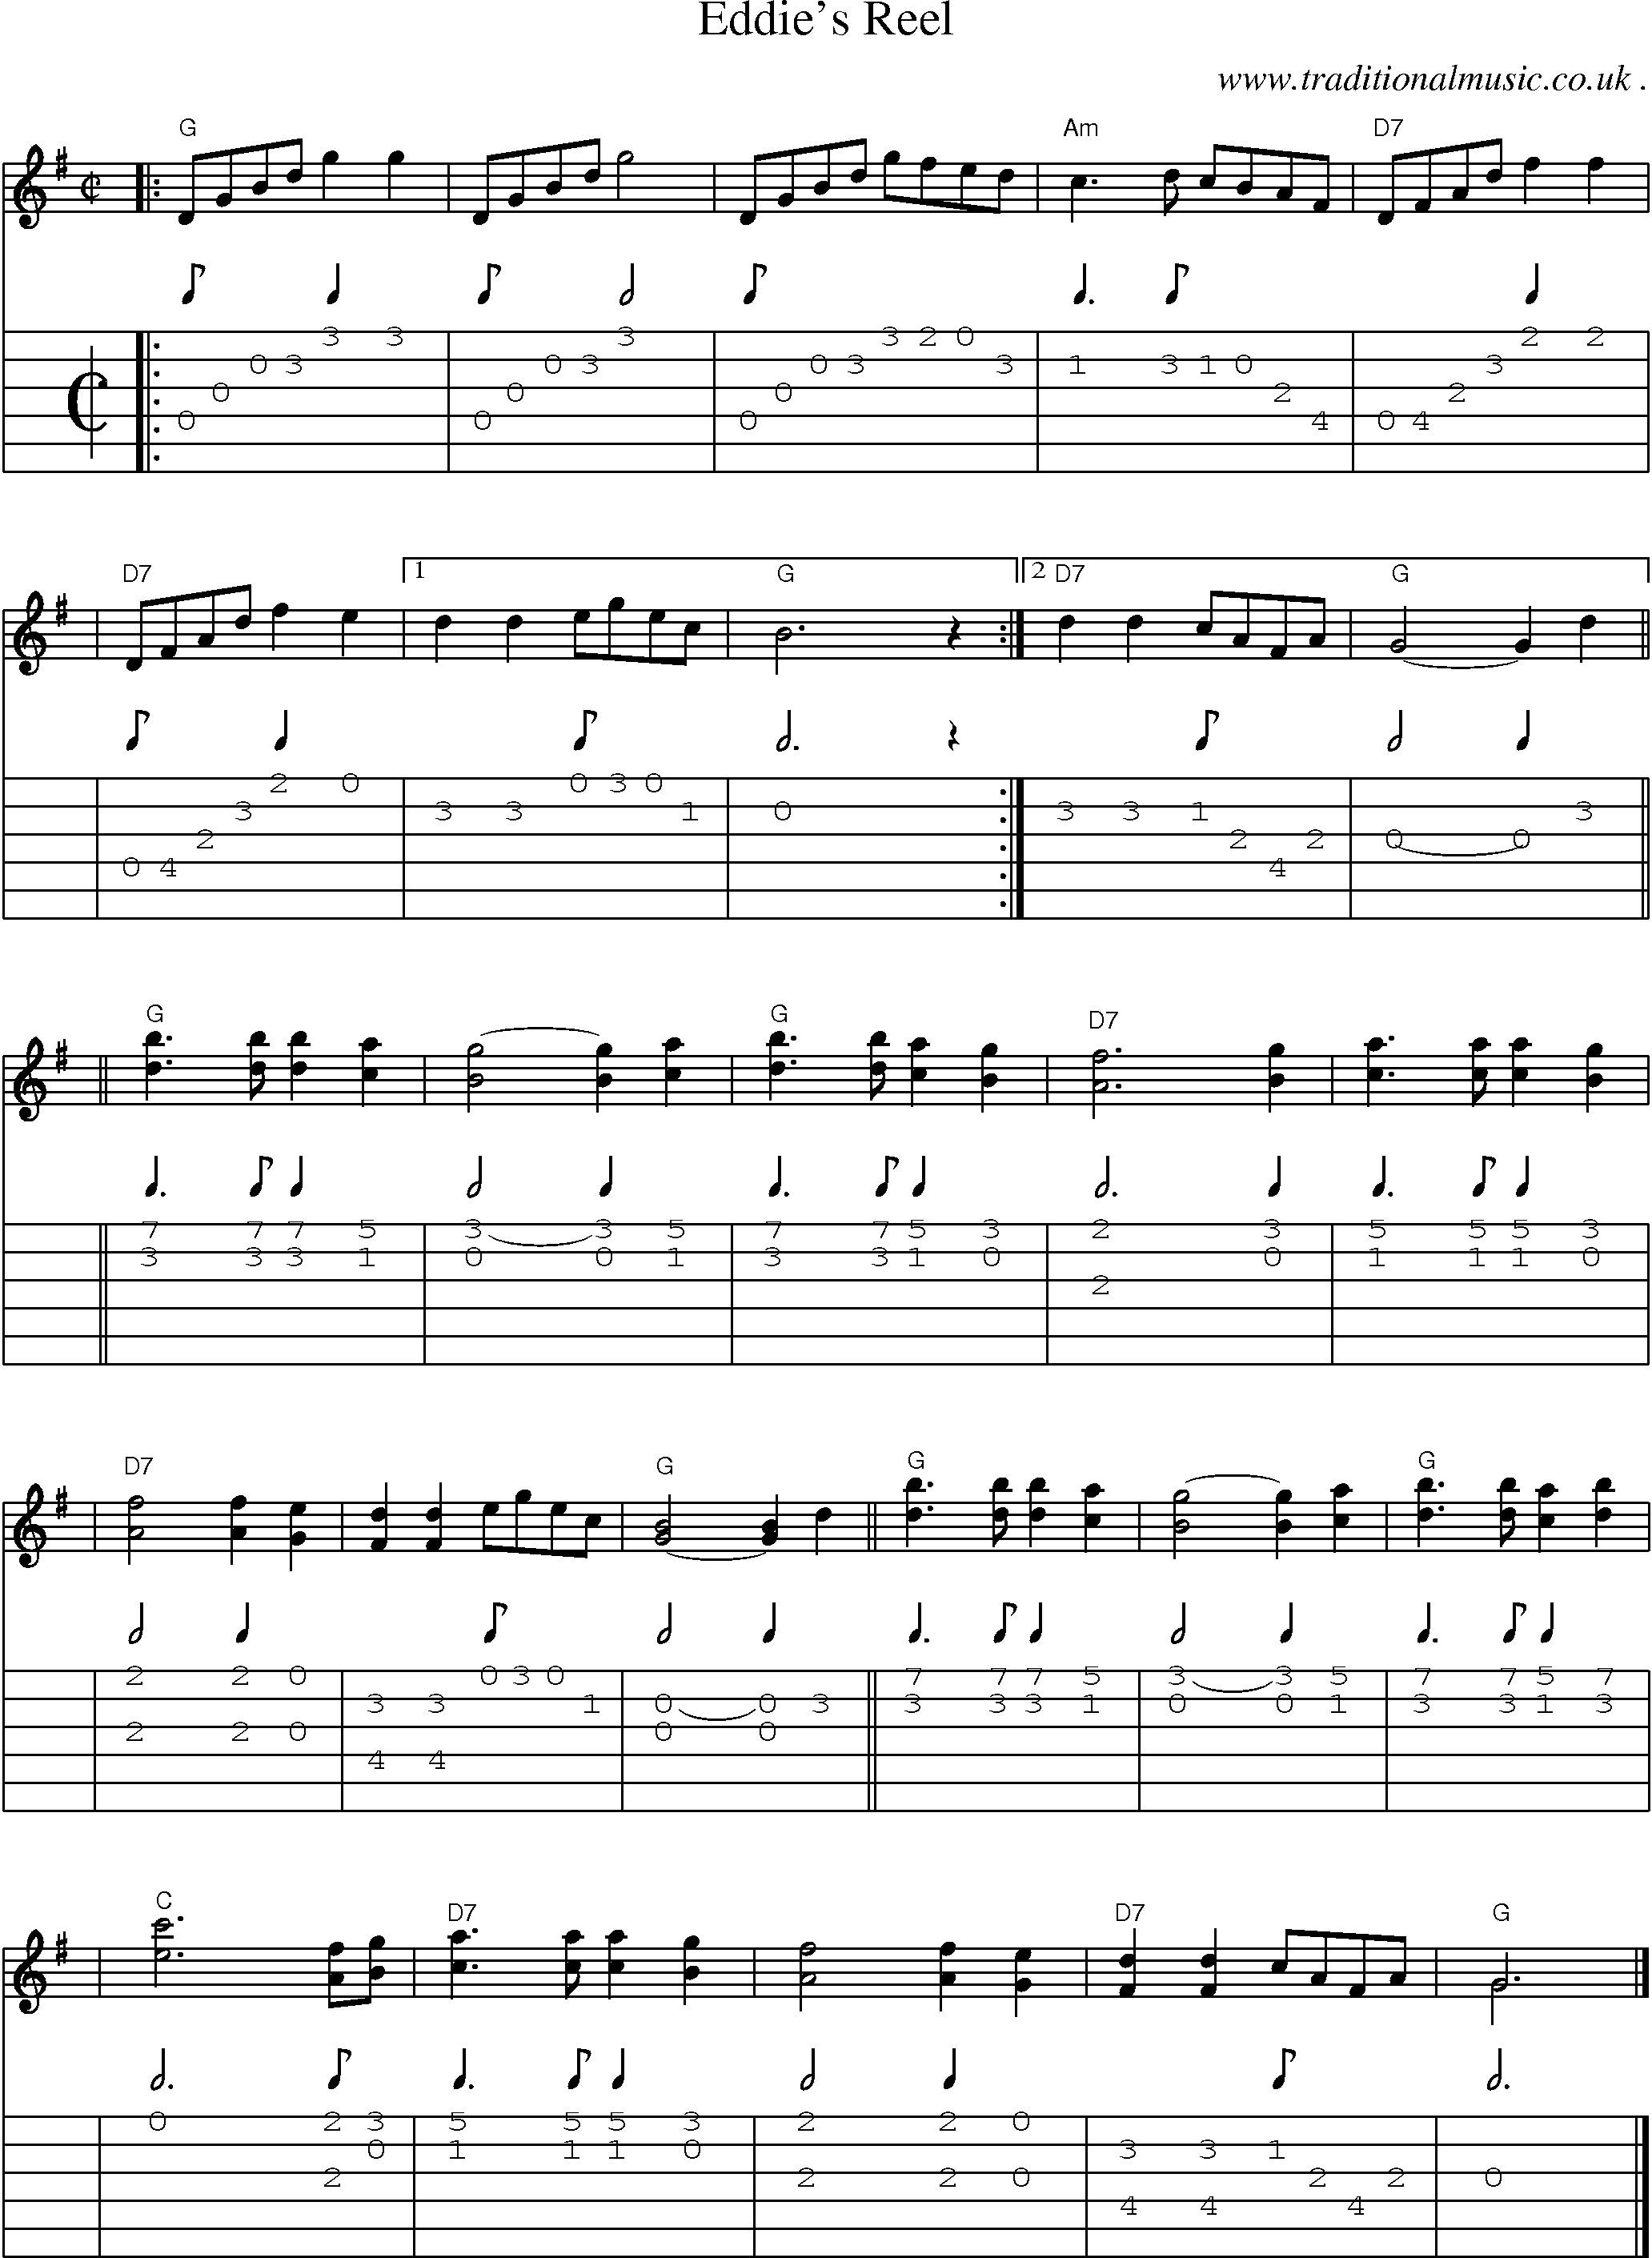 Sheet-music  score, Chords and Guitar Tabs for Eddies Reel